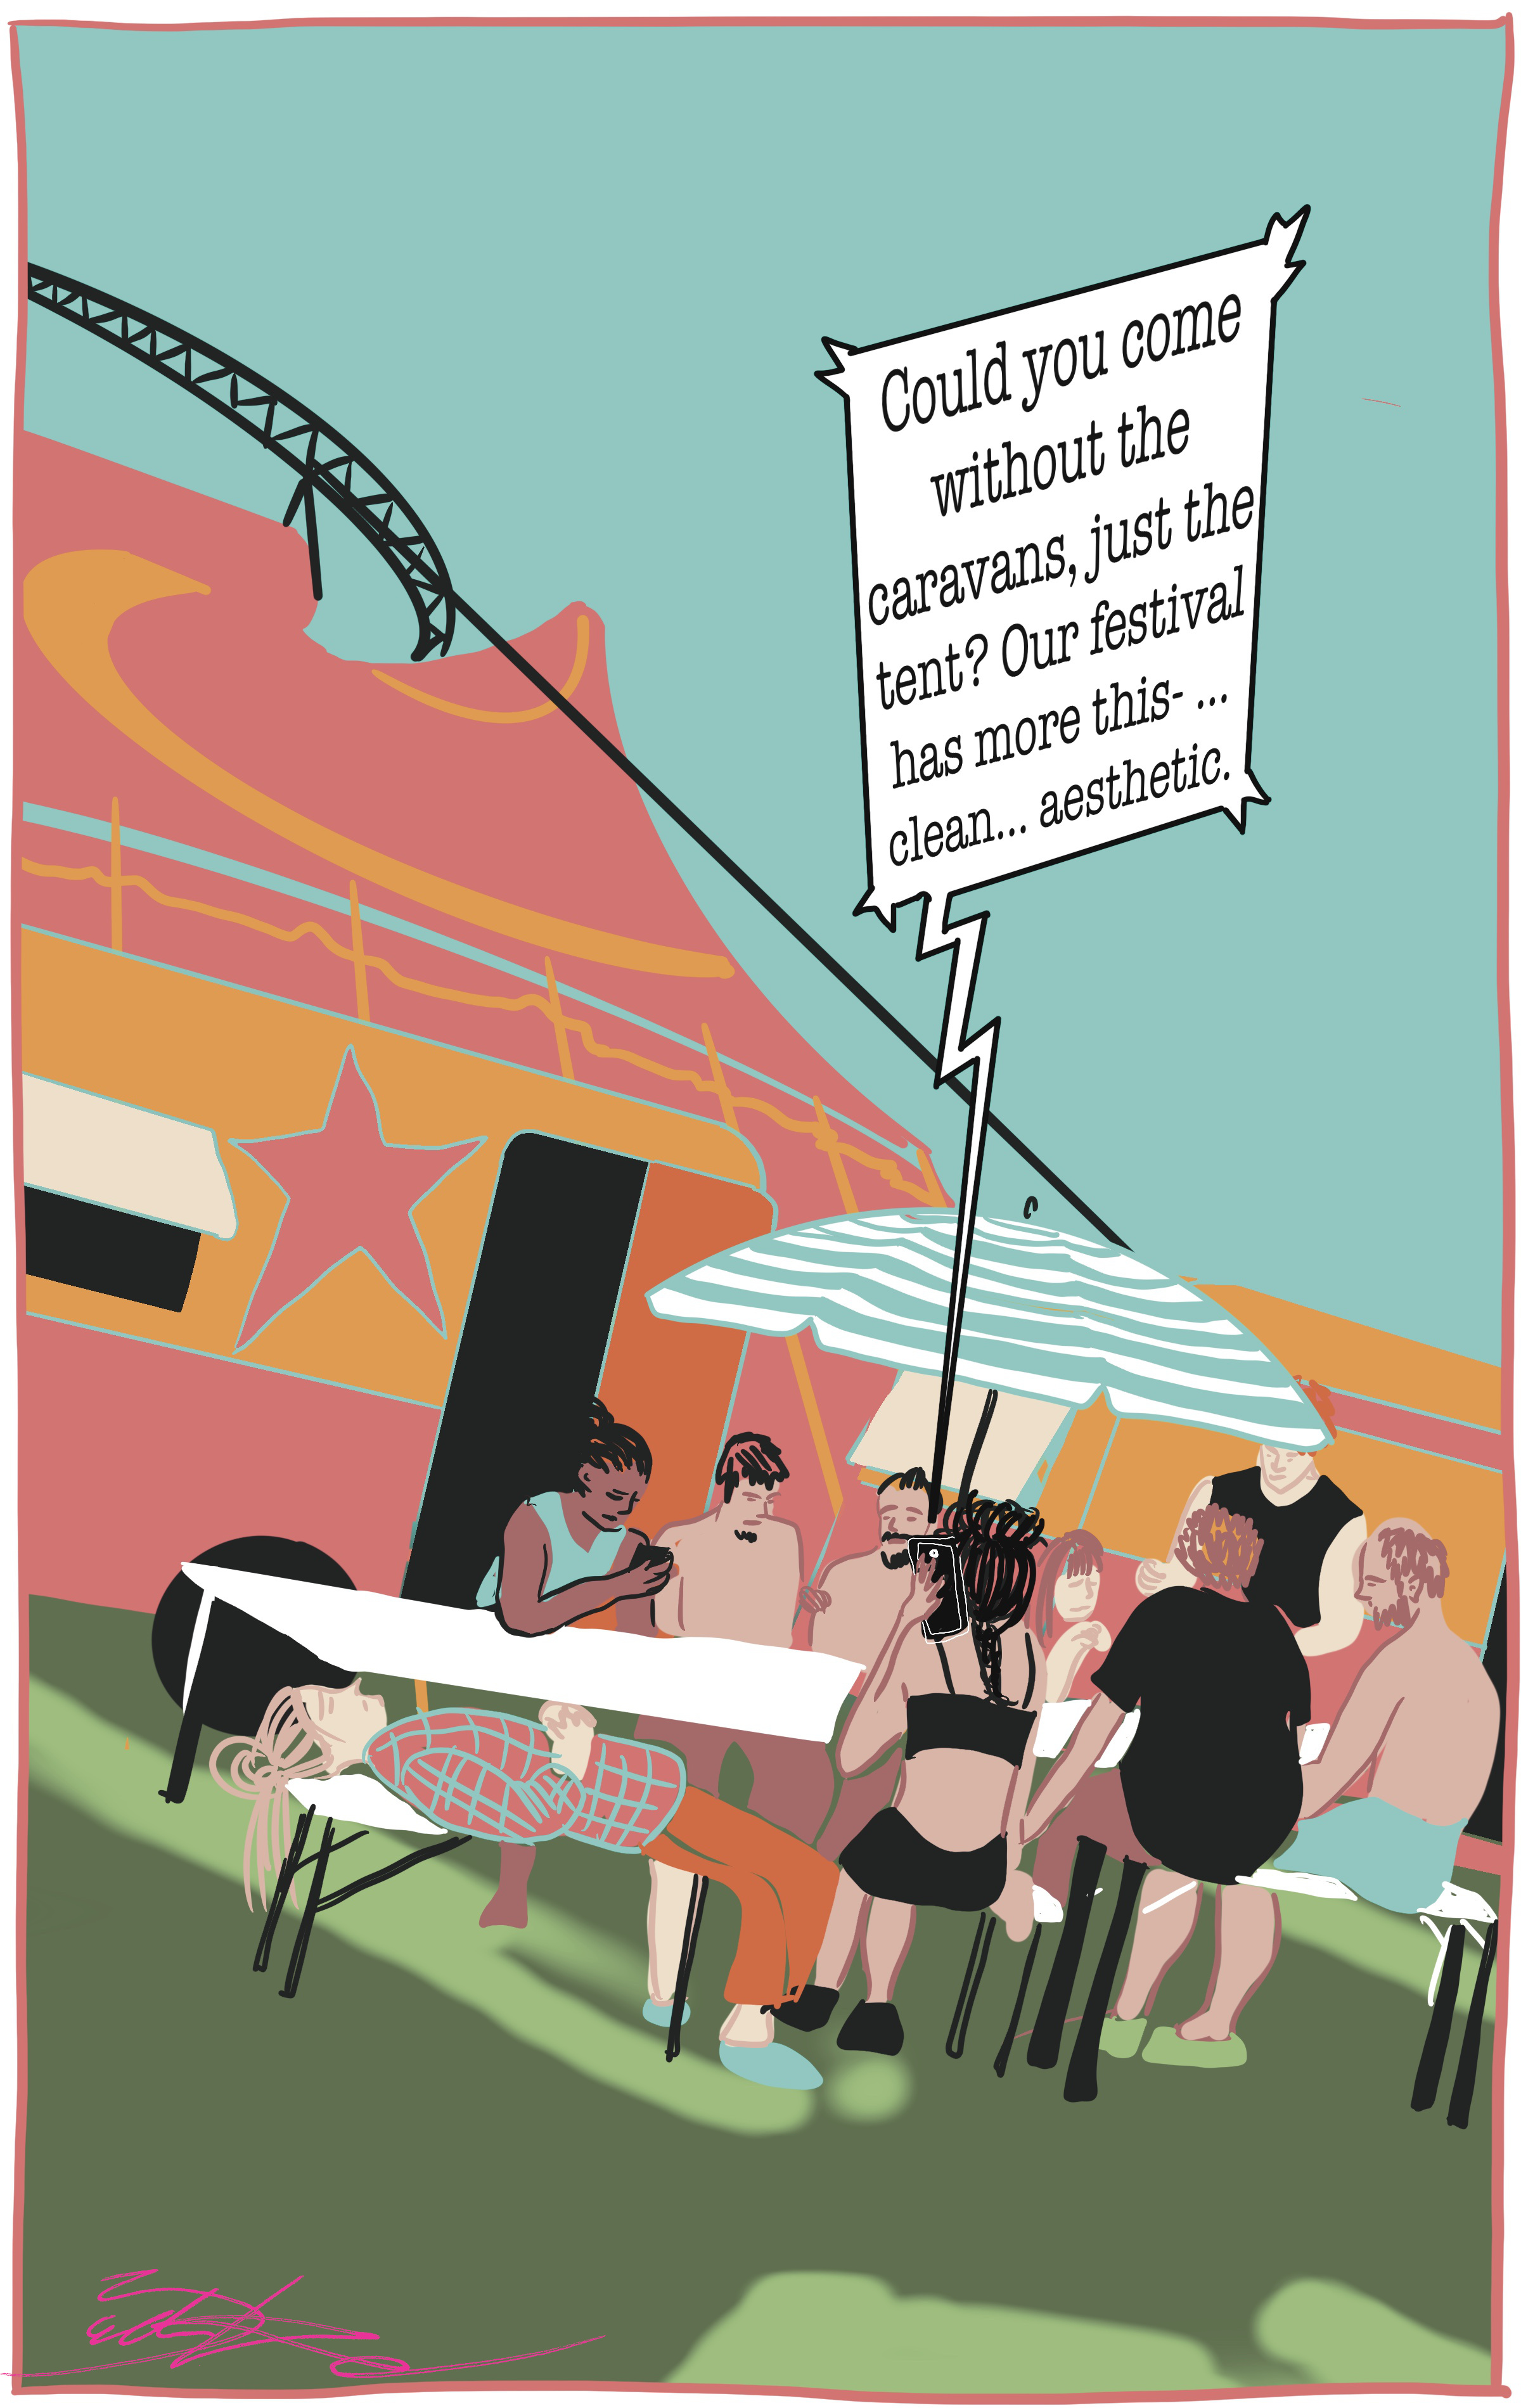 Seventh illustration of the It’s not a game -series. In the picture a bunch of people are sitting next to a table in the caravan camp next to a circus tent. One of them is on the phone. From the phone, someone is saying: ”Could you come without the caravans, just the tent? Our festival has more this - clean - aesthetic.”